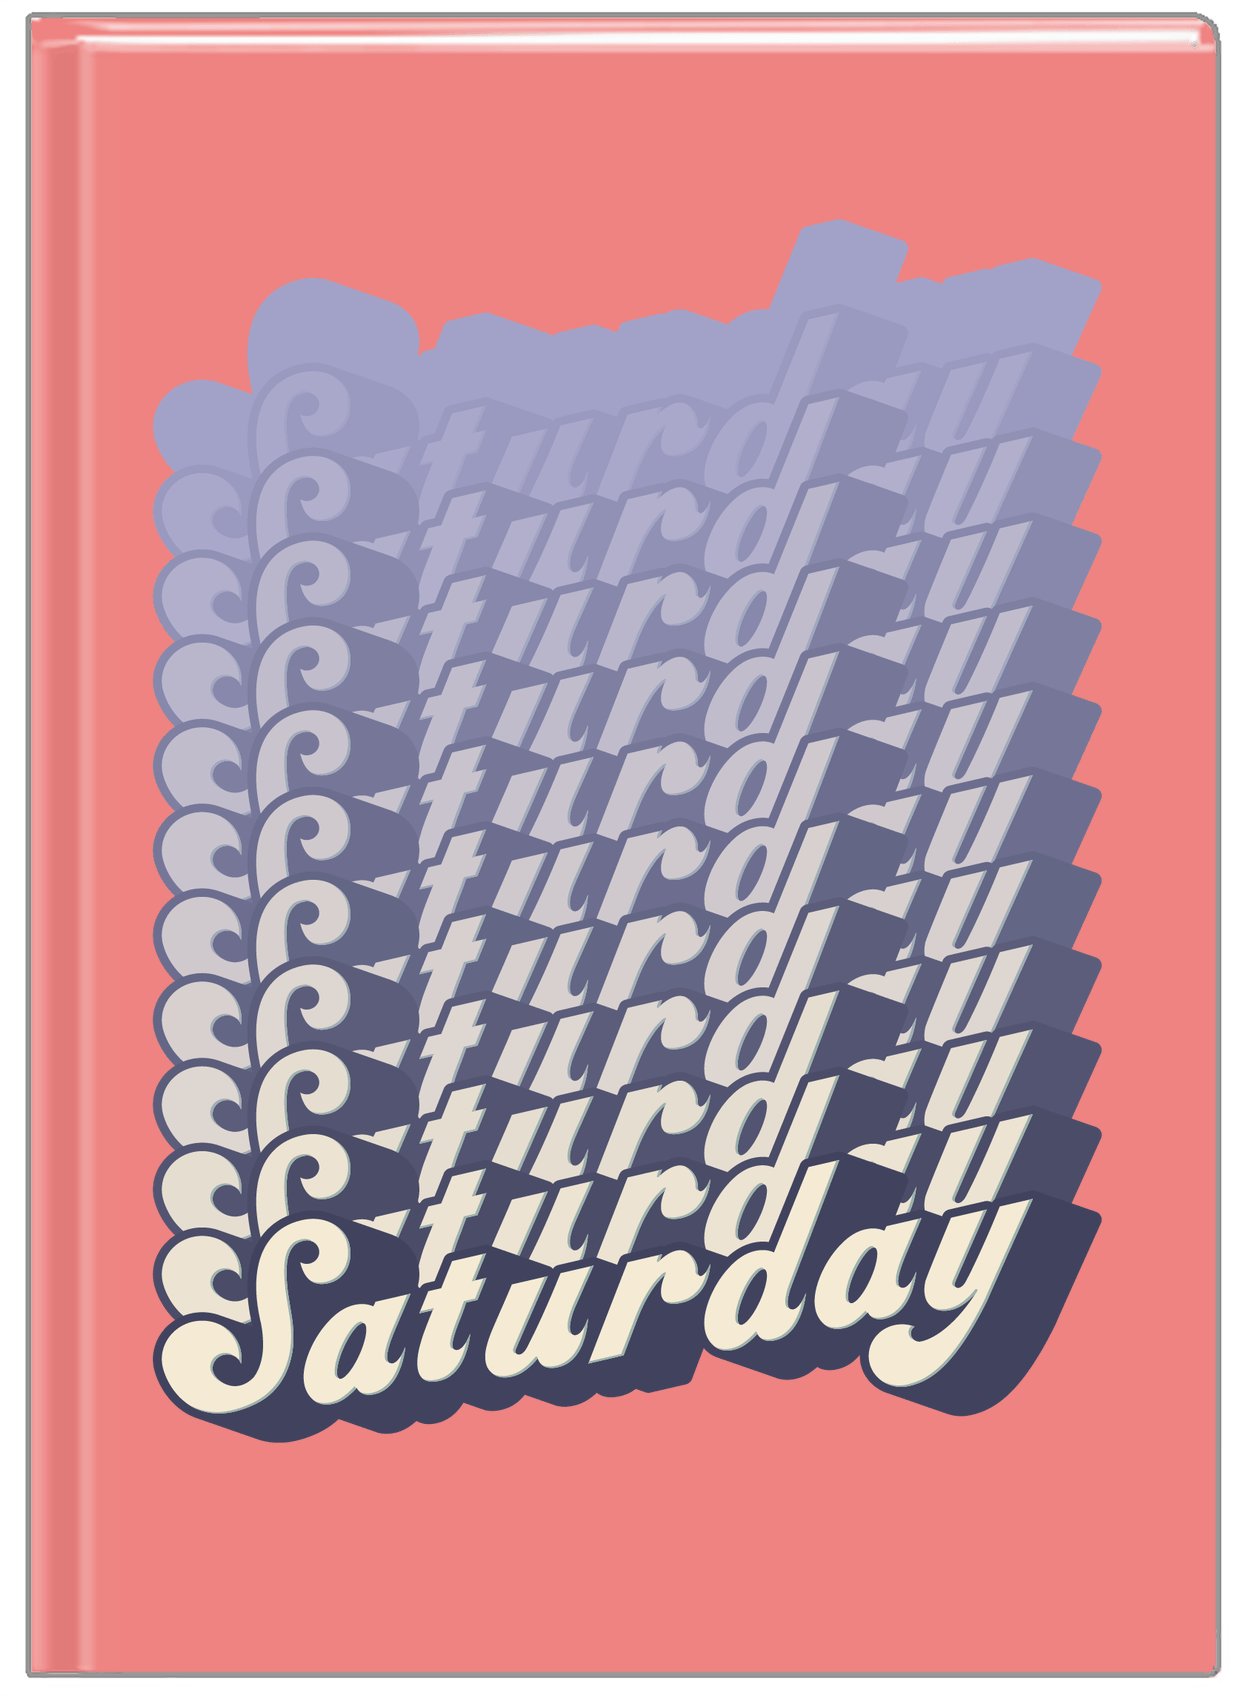 Retro Saturday Journal - Front View